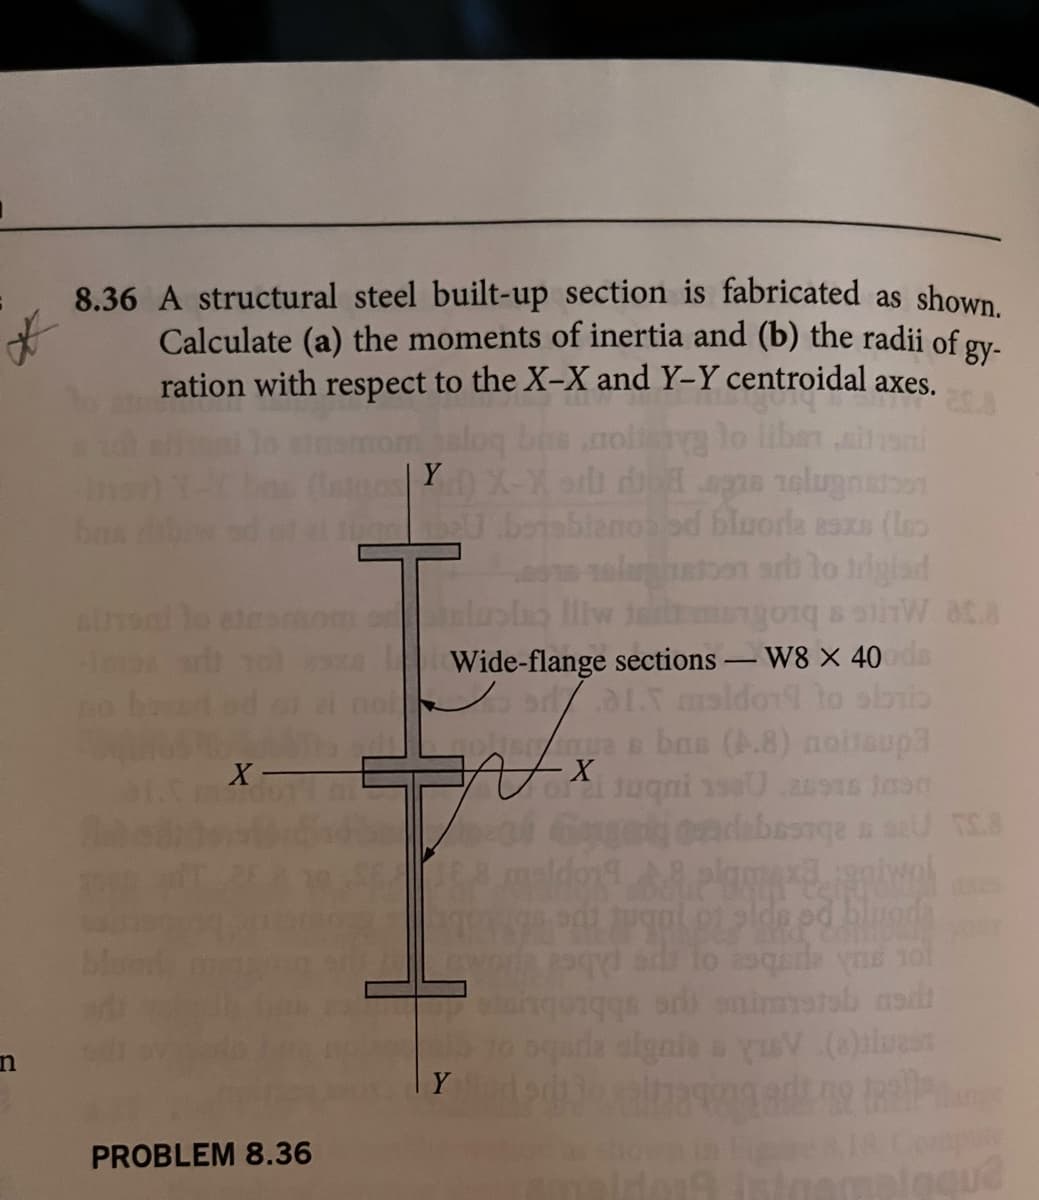 n
8.36 A structural steel built-up section is fabricated as shown.
Calculate (a) the moments of inertia and (b) the radii of gy-
ration with respect to the X-X and Y-Y centroidal axes.
libs
ban
sinec
X
PROBLEM 8.36
Istori) X-X ar dd spas zelugnation
JuneU .betsblanos od bluoria esze (les
olunt
arb to trigiad
olusia lliw tam
orqaliW ata
Wide-flange sections - W8 X 40ods
9/.01.5 maldo
Y
Ascue & bas (A.8) nohtaup3
- X
o Juqni 1980 .ausas jasn
debeanga a su TS.8
doplam 8 piwni
pgal or elde ed bing
to asqerle yns 101
sd) enimmstab asdi
squda signie s yuV (e)lues
73991gading teller
sinemalaqu2